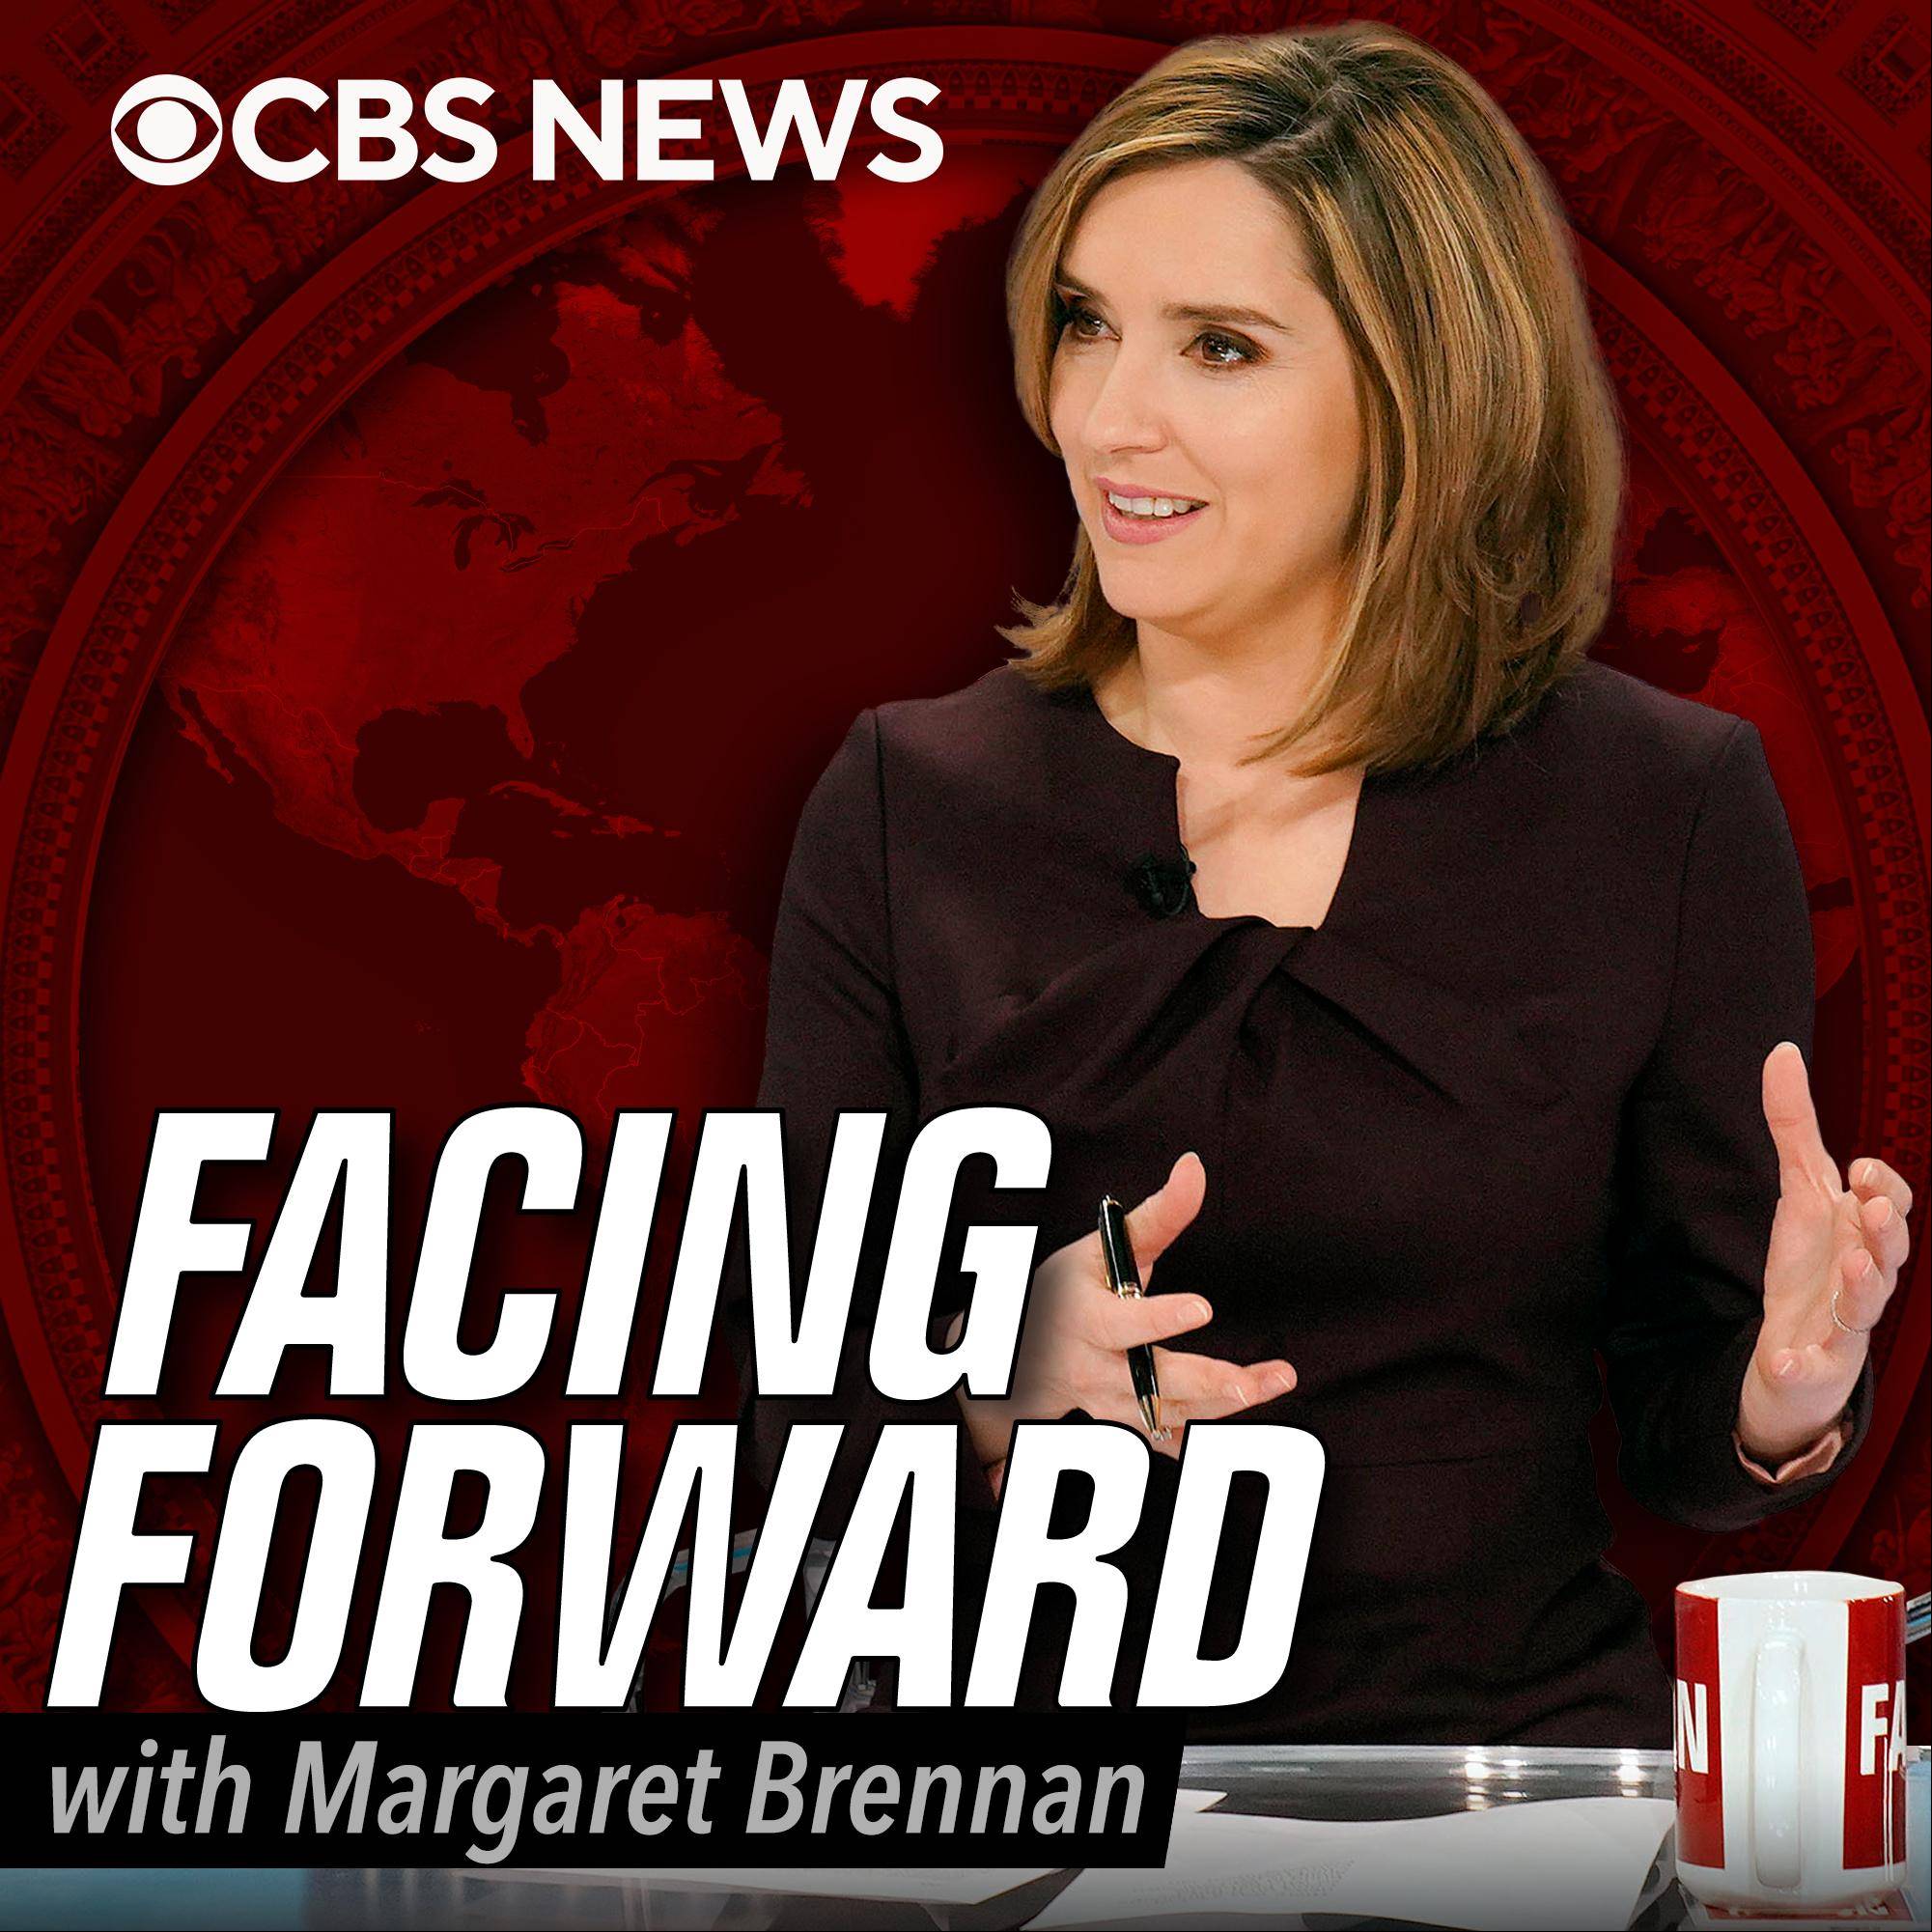 “FACING FORWARD WITH MARGARET BRENNANDEBUTS FIRST EPISODE JAN. 22, 2021 ON PODCAST FEEDS EVERYWHERE